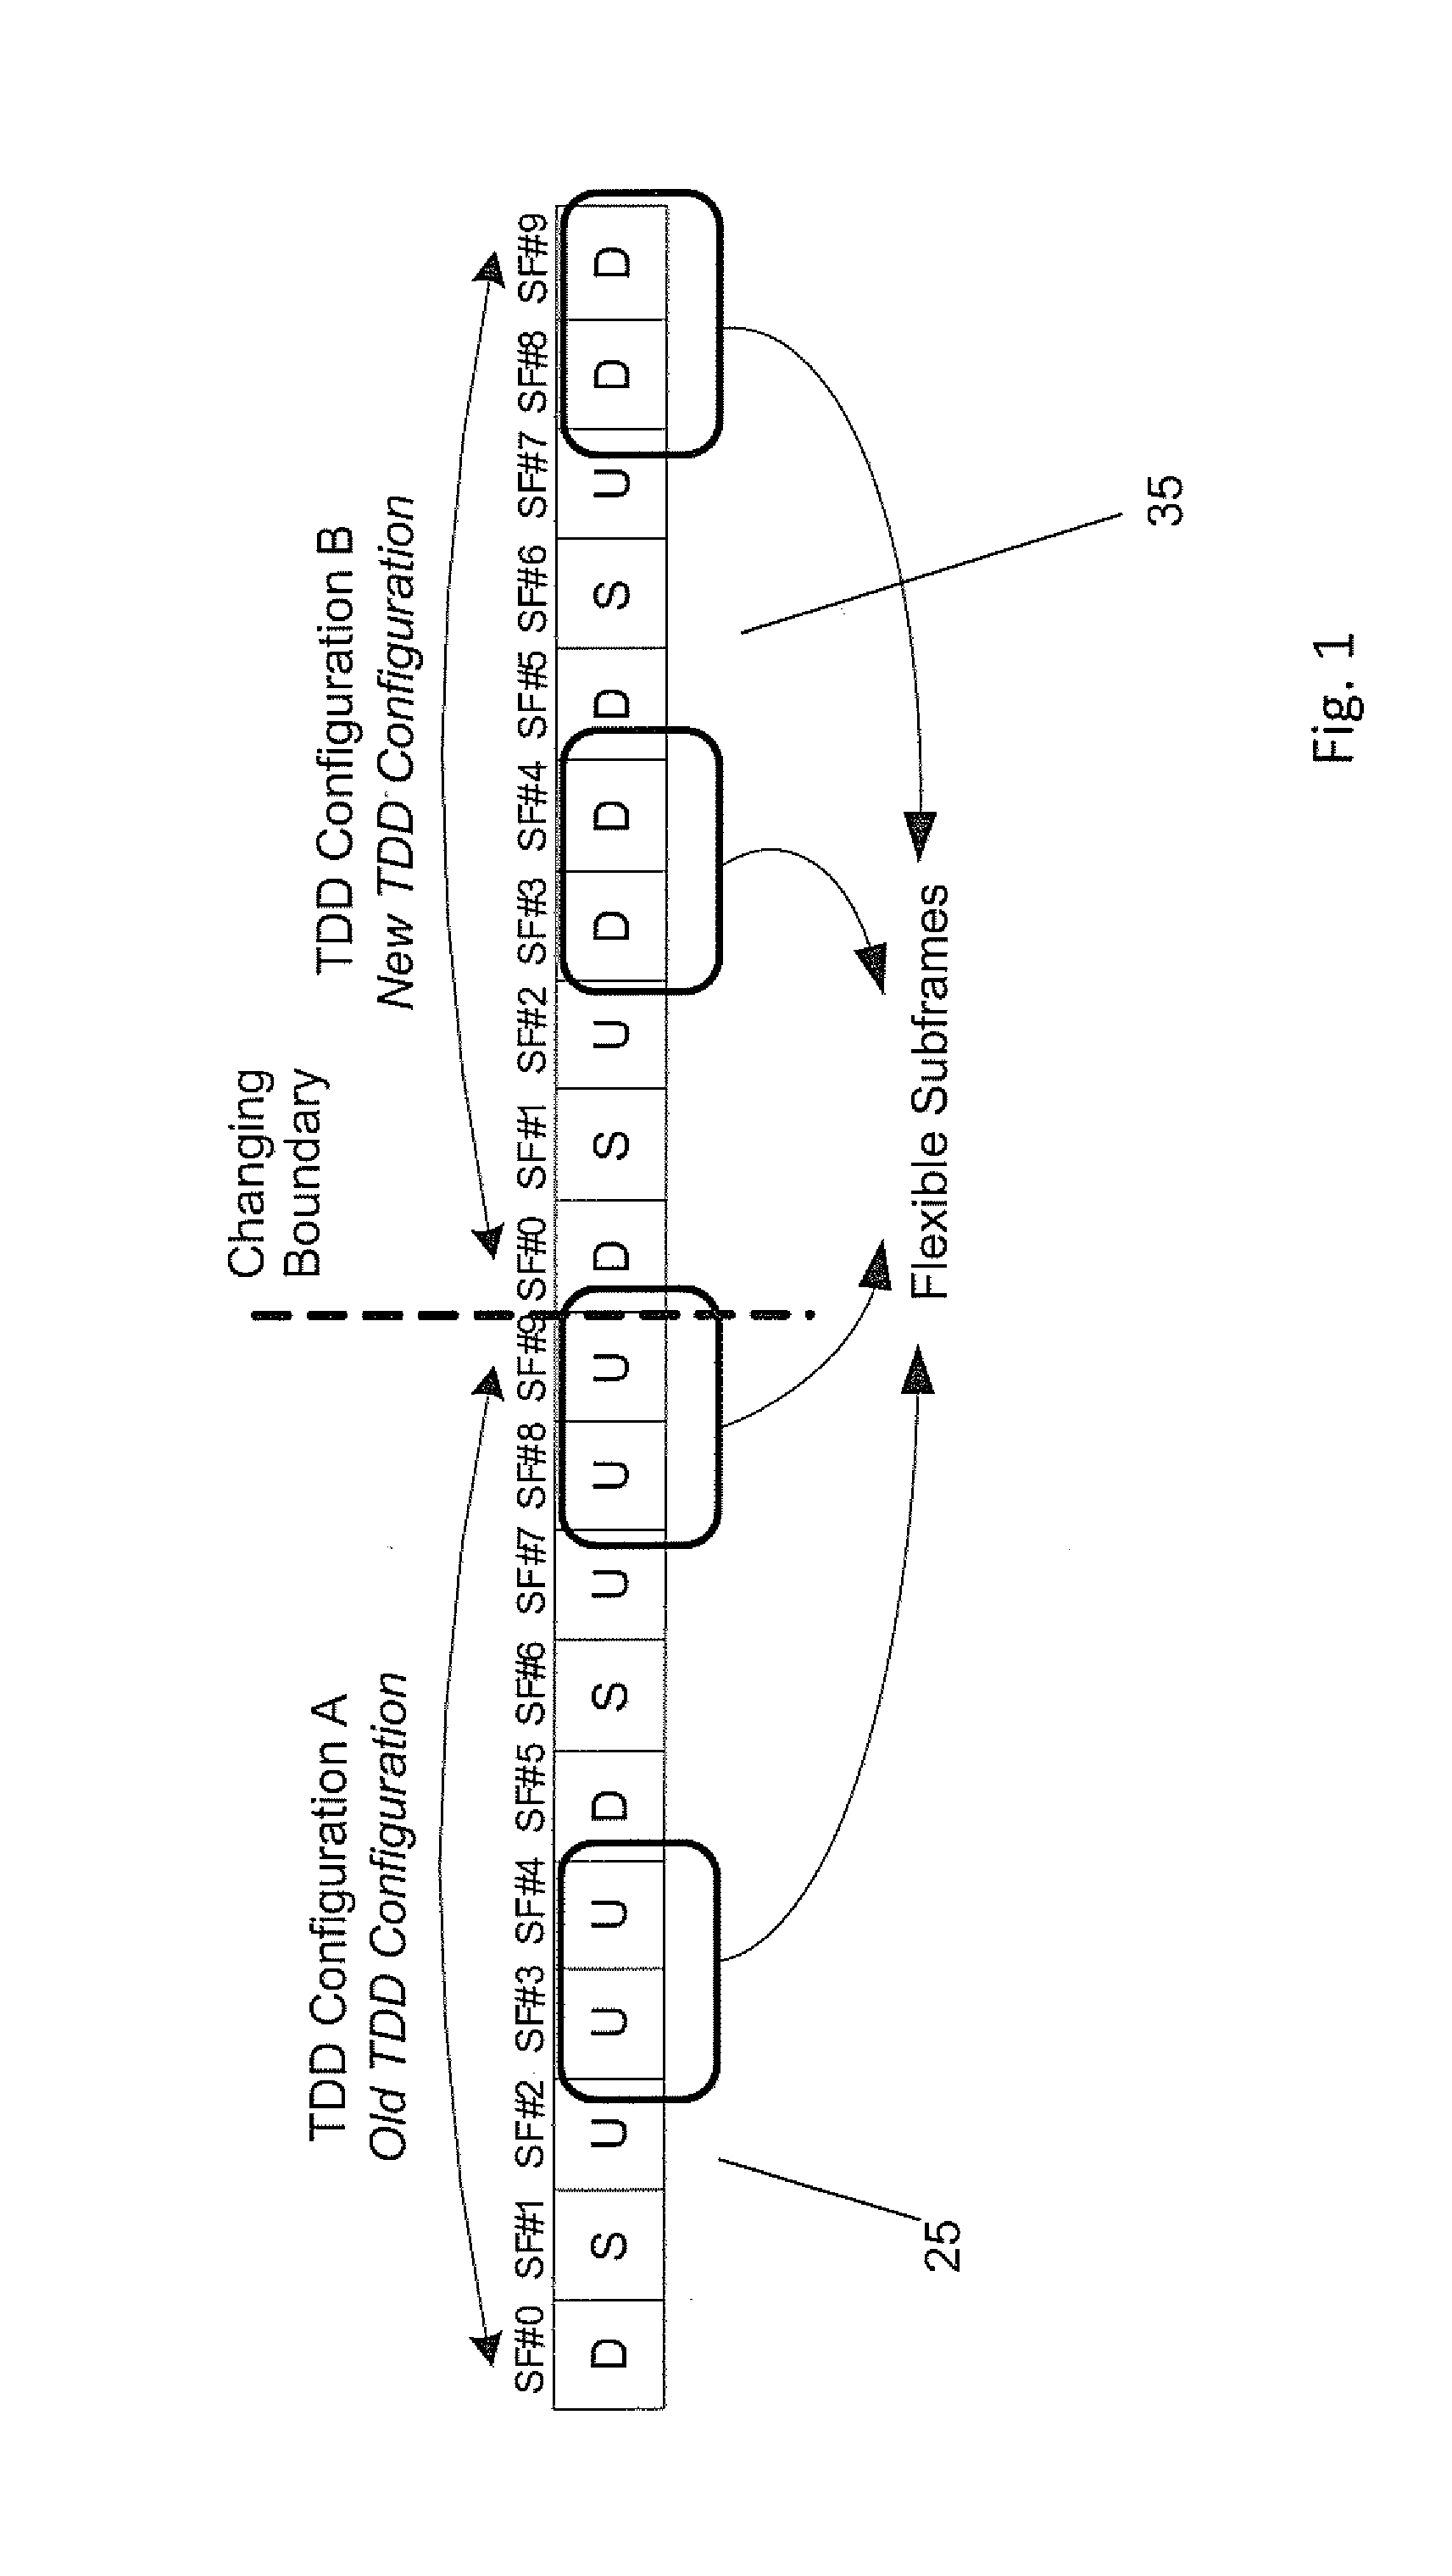 Mechanism for Enhancing Power Control in Time Division Based Communications